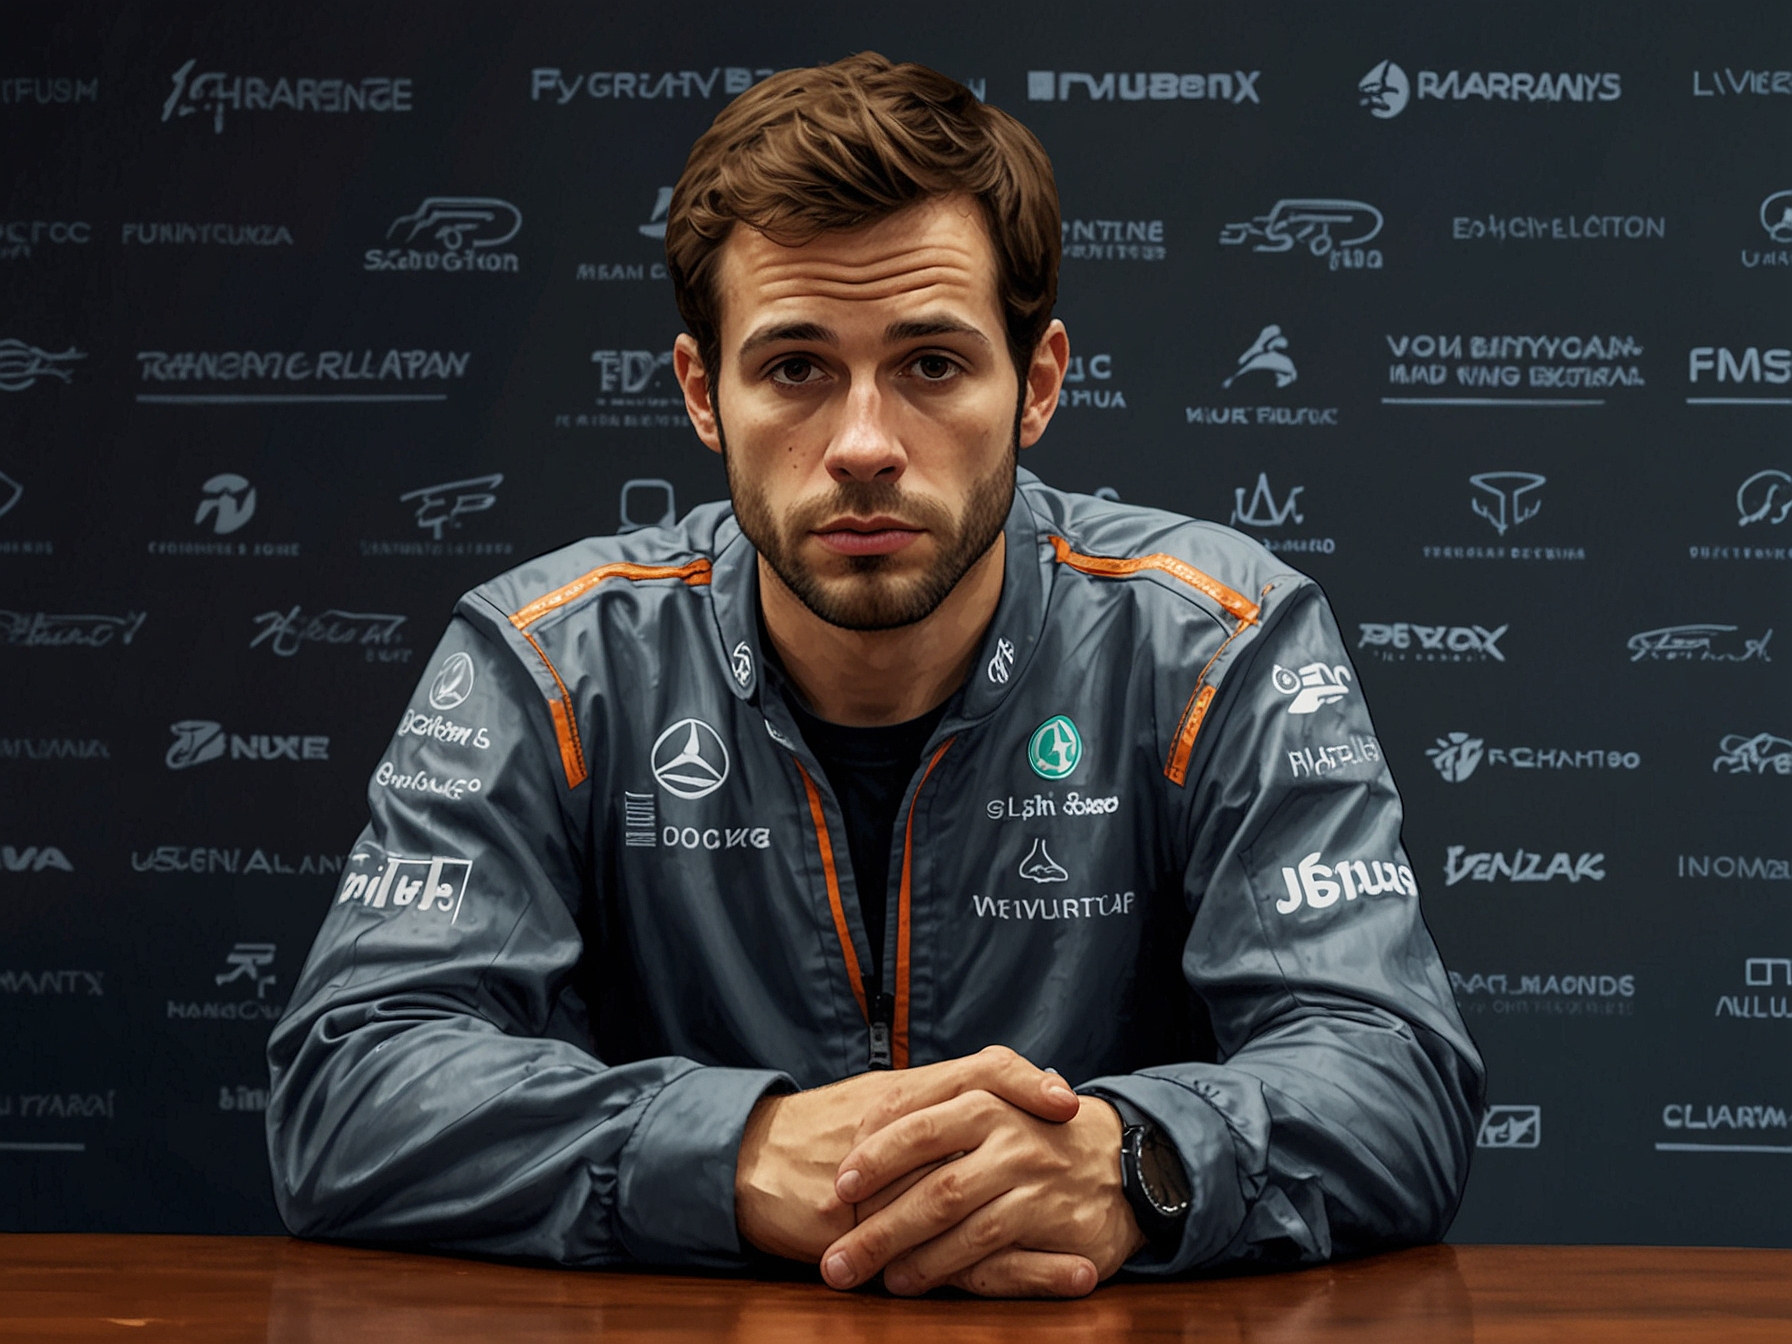 A concerned F1 star during a press conference, addressing the media about the urgent need for an investigation into driver well-being, highlighting the physical and mental stress faced by drivers.